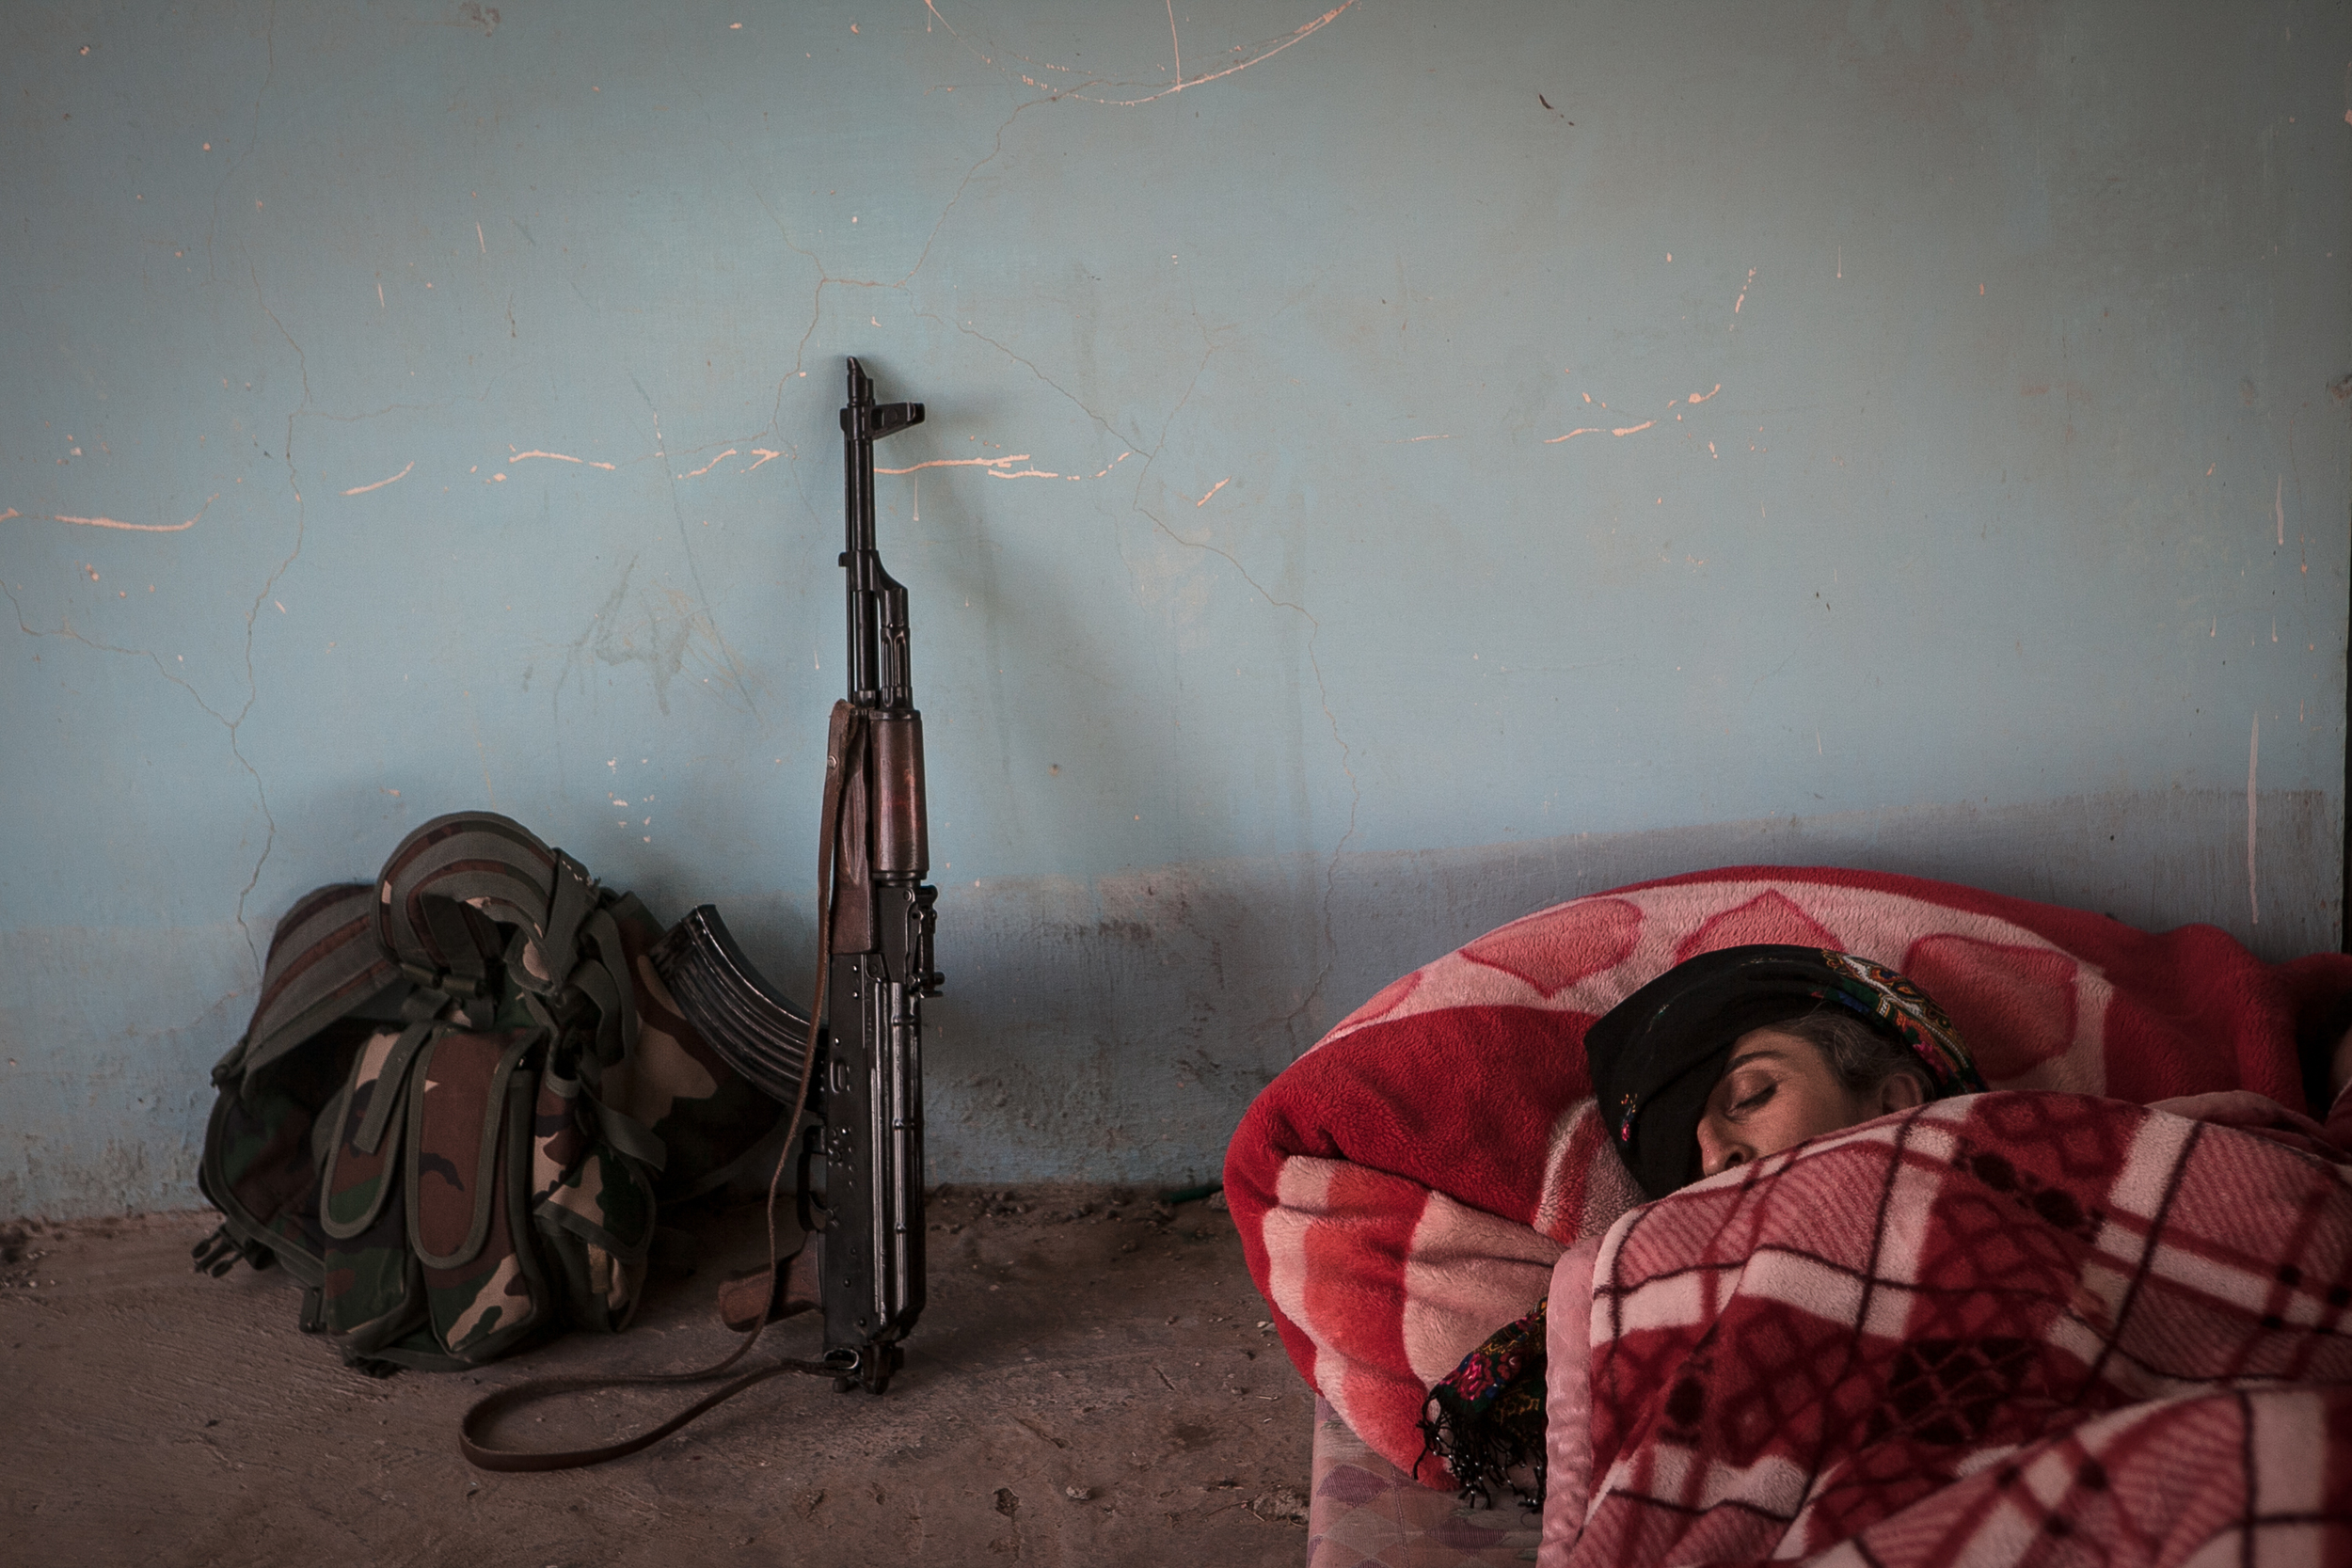  YPJ soldier Shavin Bachouk sleeps at an abandoned army post on the outskirts of Raabia, Iraq. Many YPG / YPJ soldier stake out at on the Syrian-Iraq border to fend of ISIS attacks. 